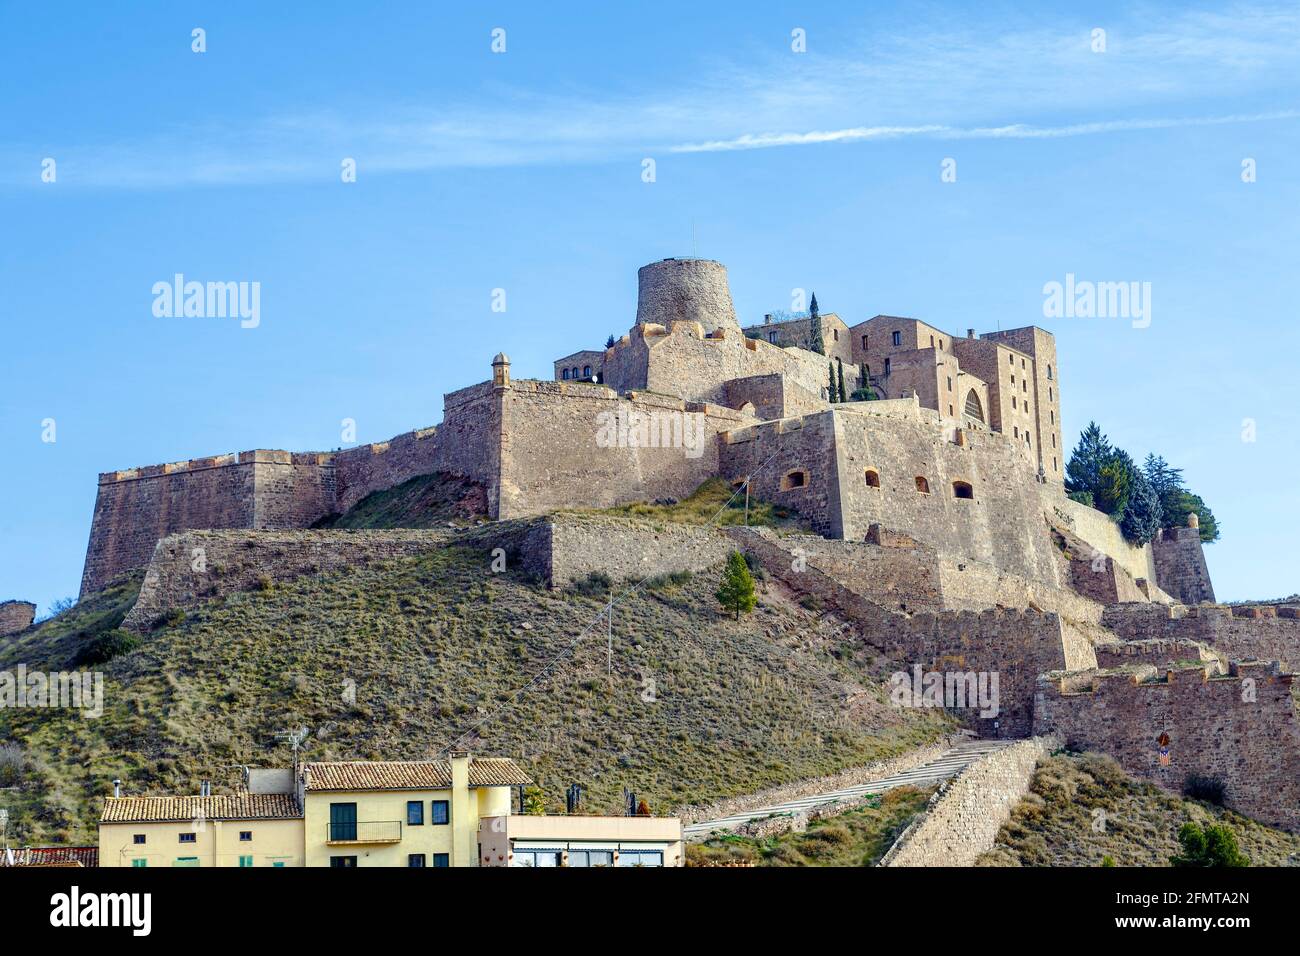 Cardona castle is a famous medieval castle in Catalonia. Now it is a famous state run hotel or 'parador'. Stock Photo